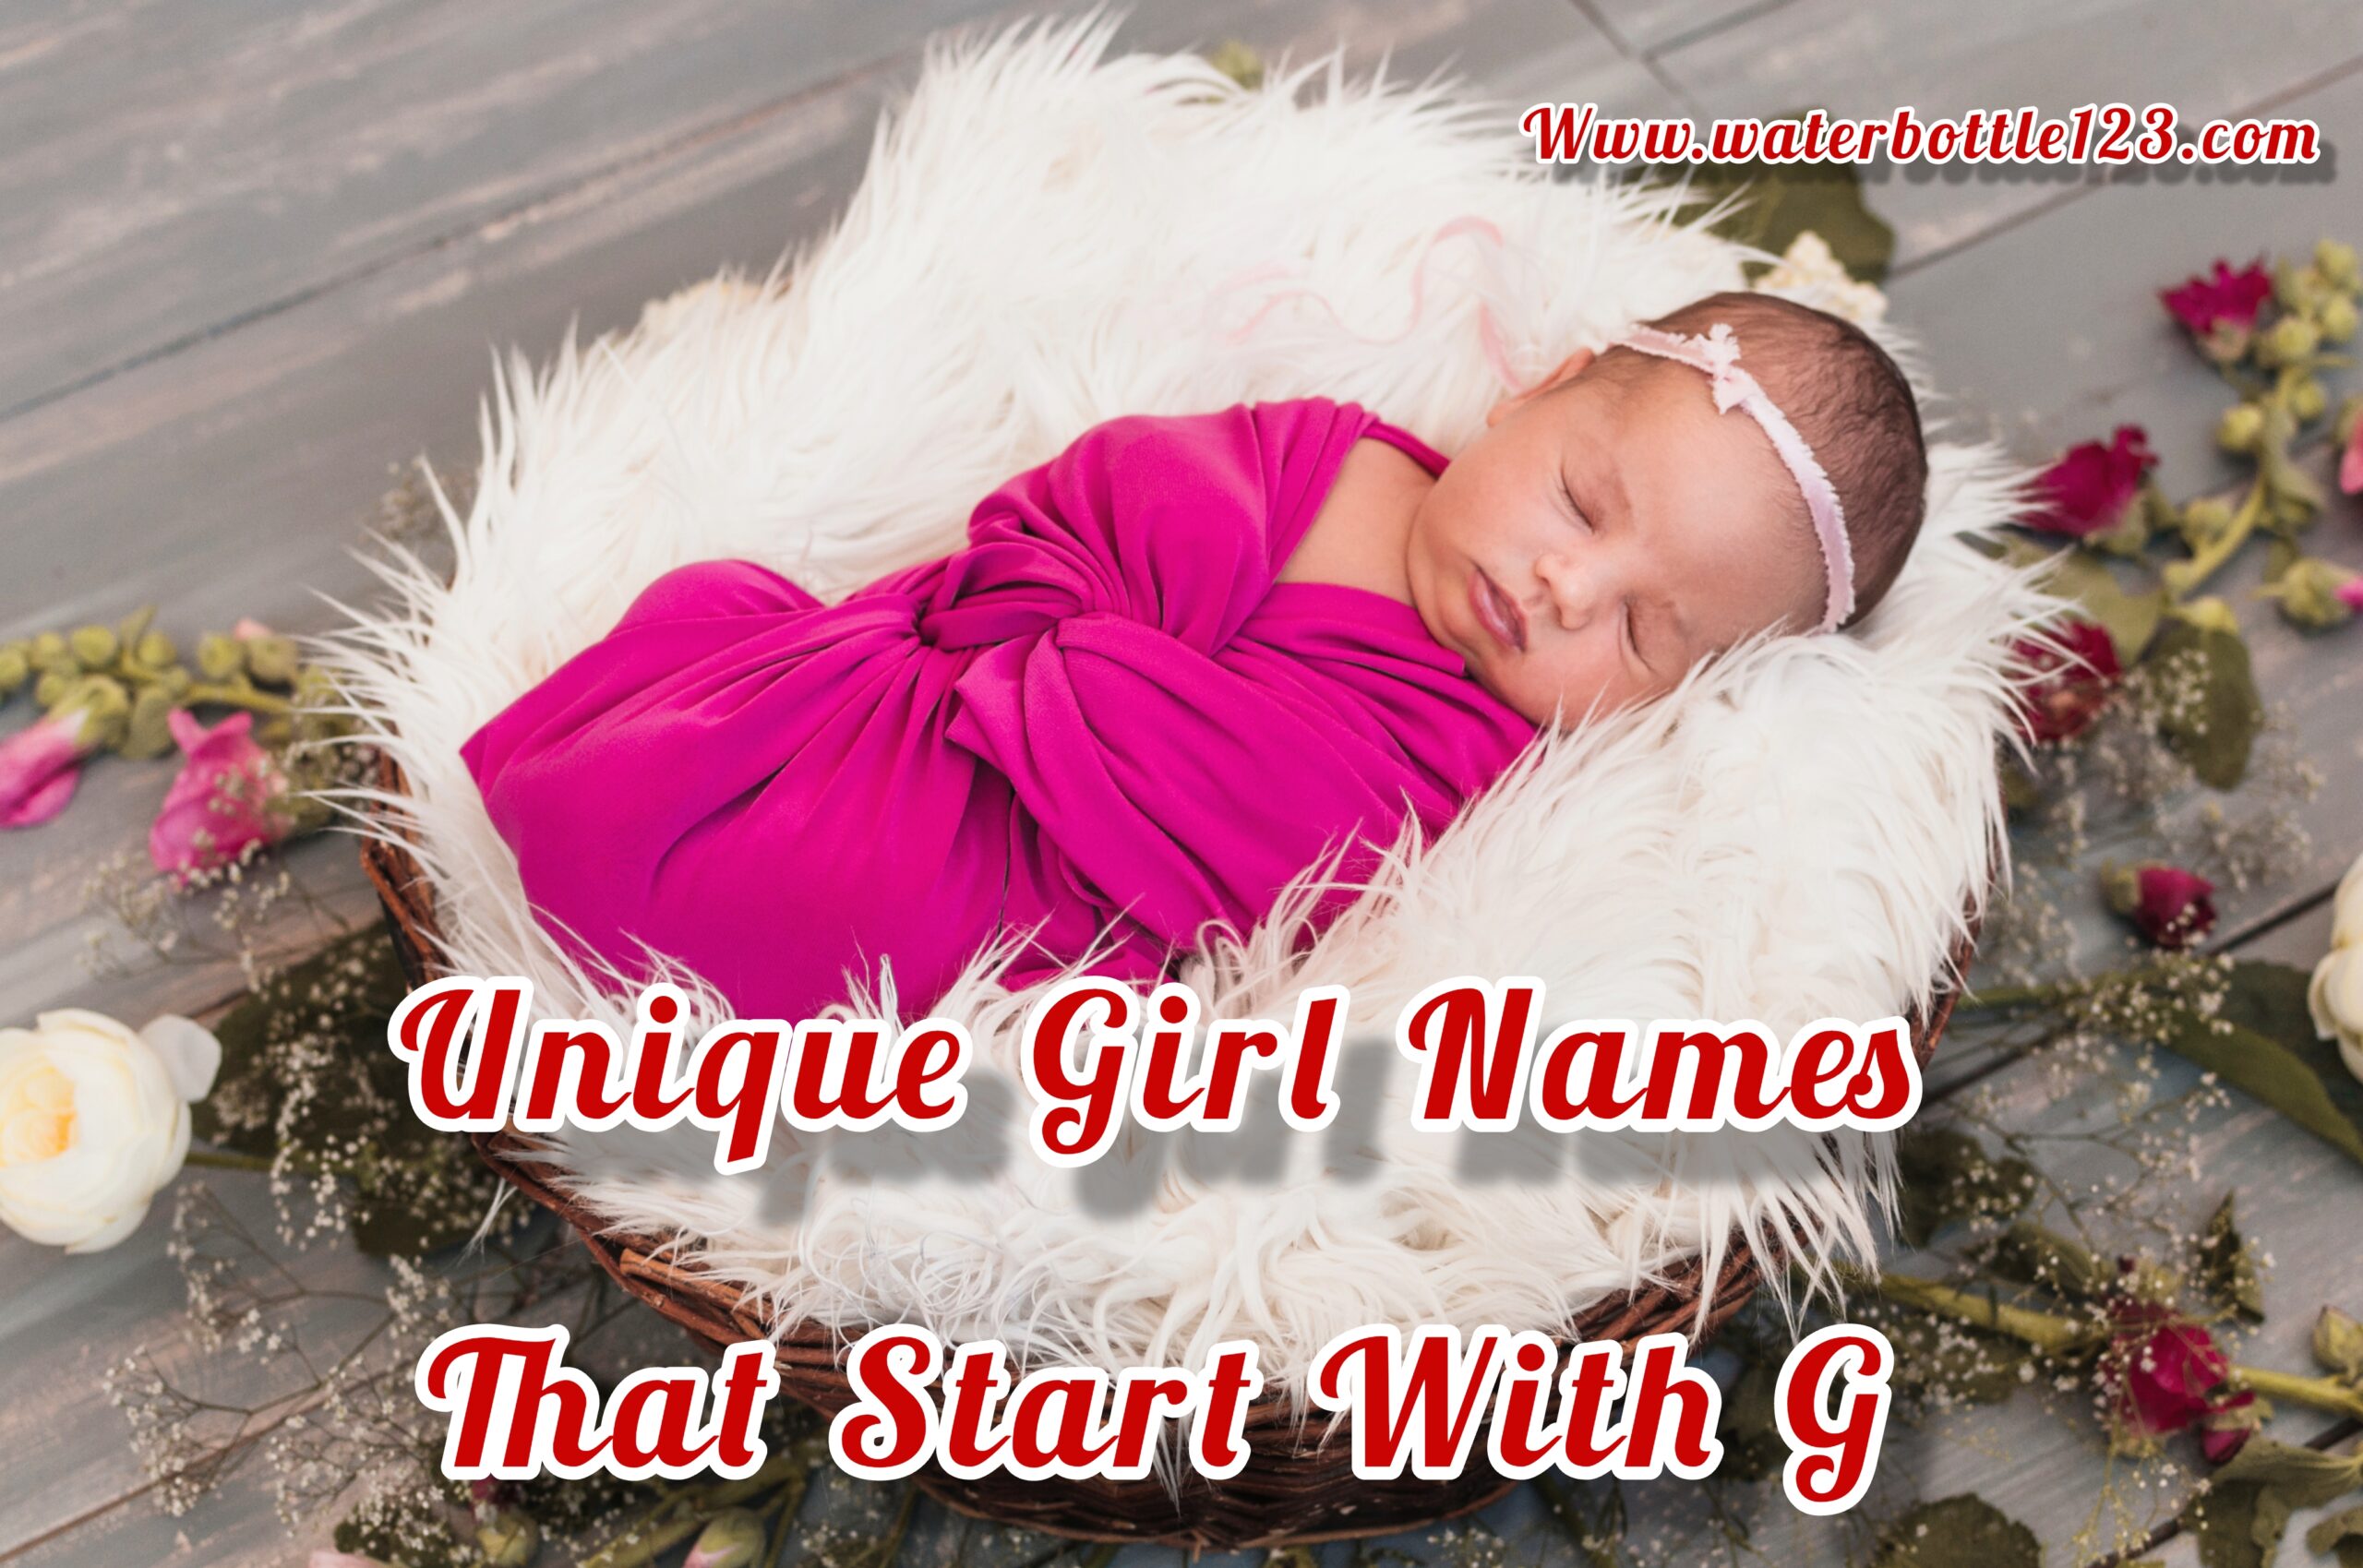 Unique Girl Names That Start With G